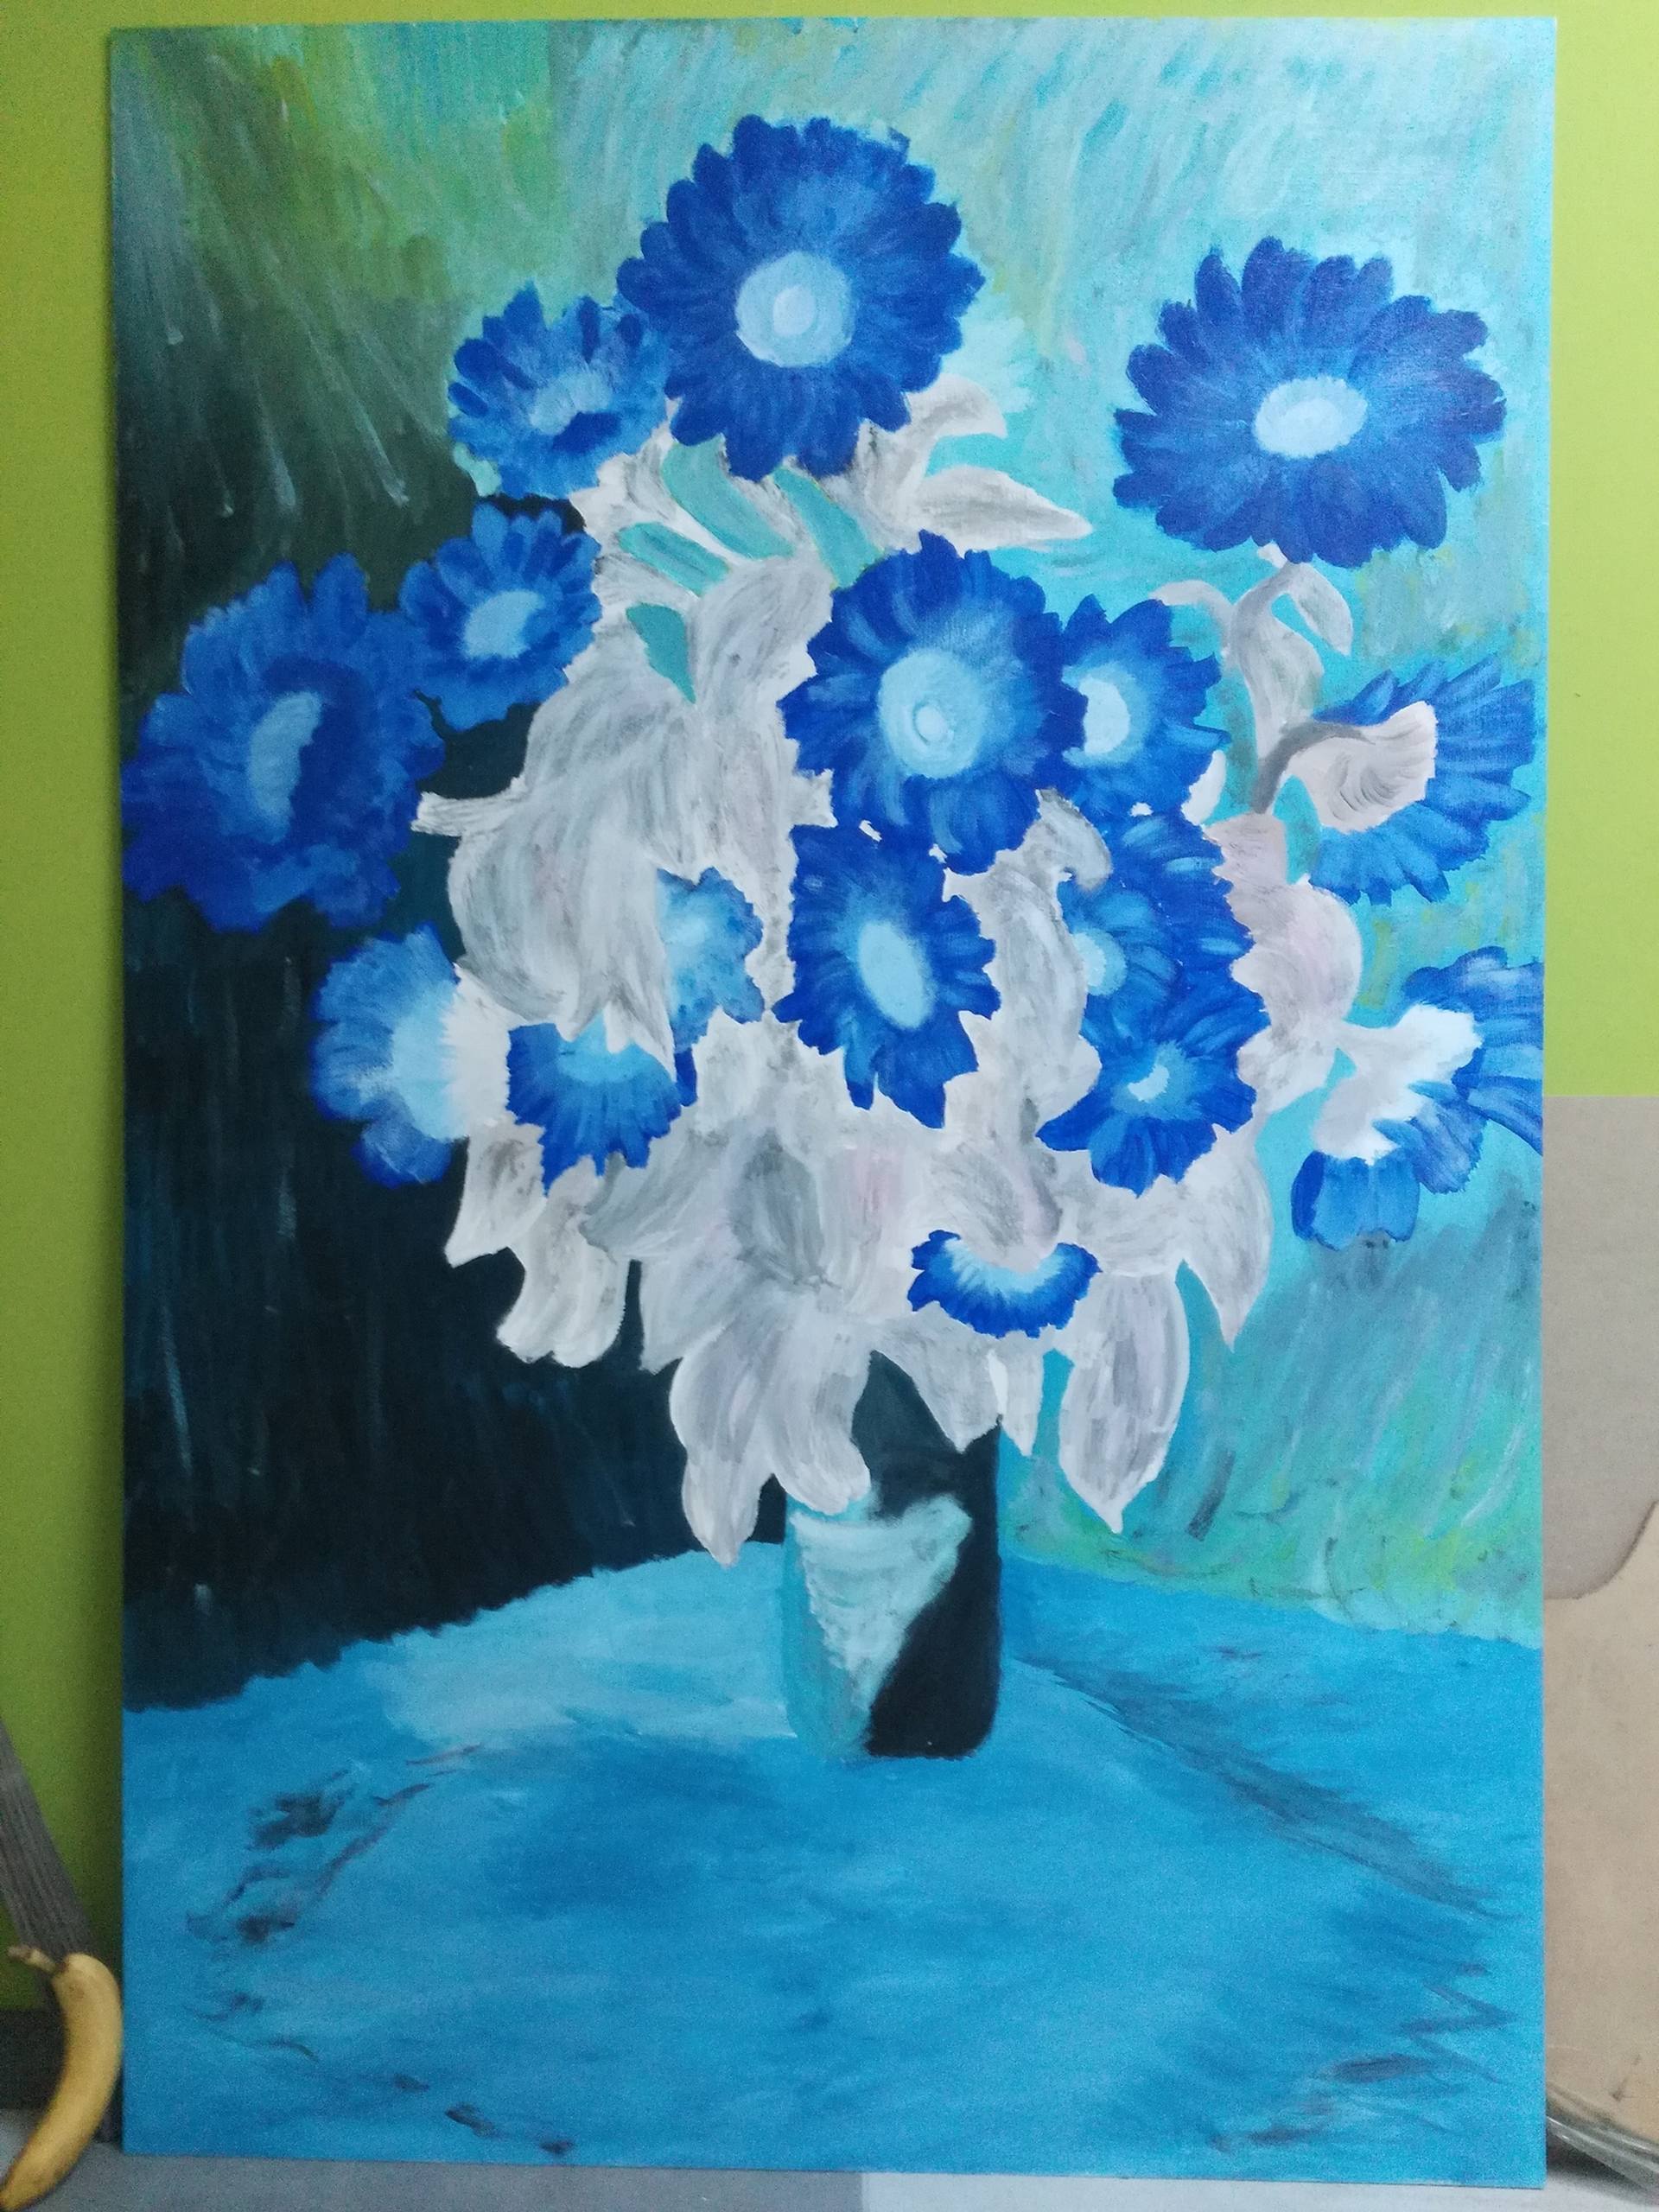 Painting with Inverted Colors 